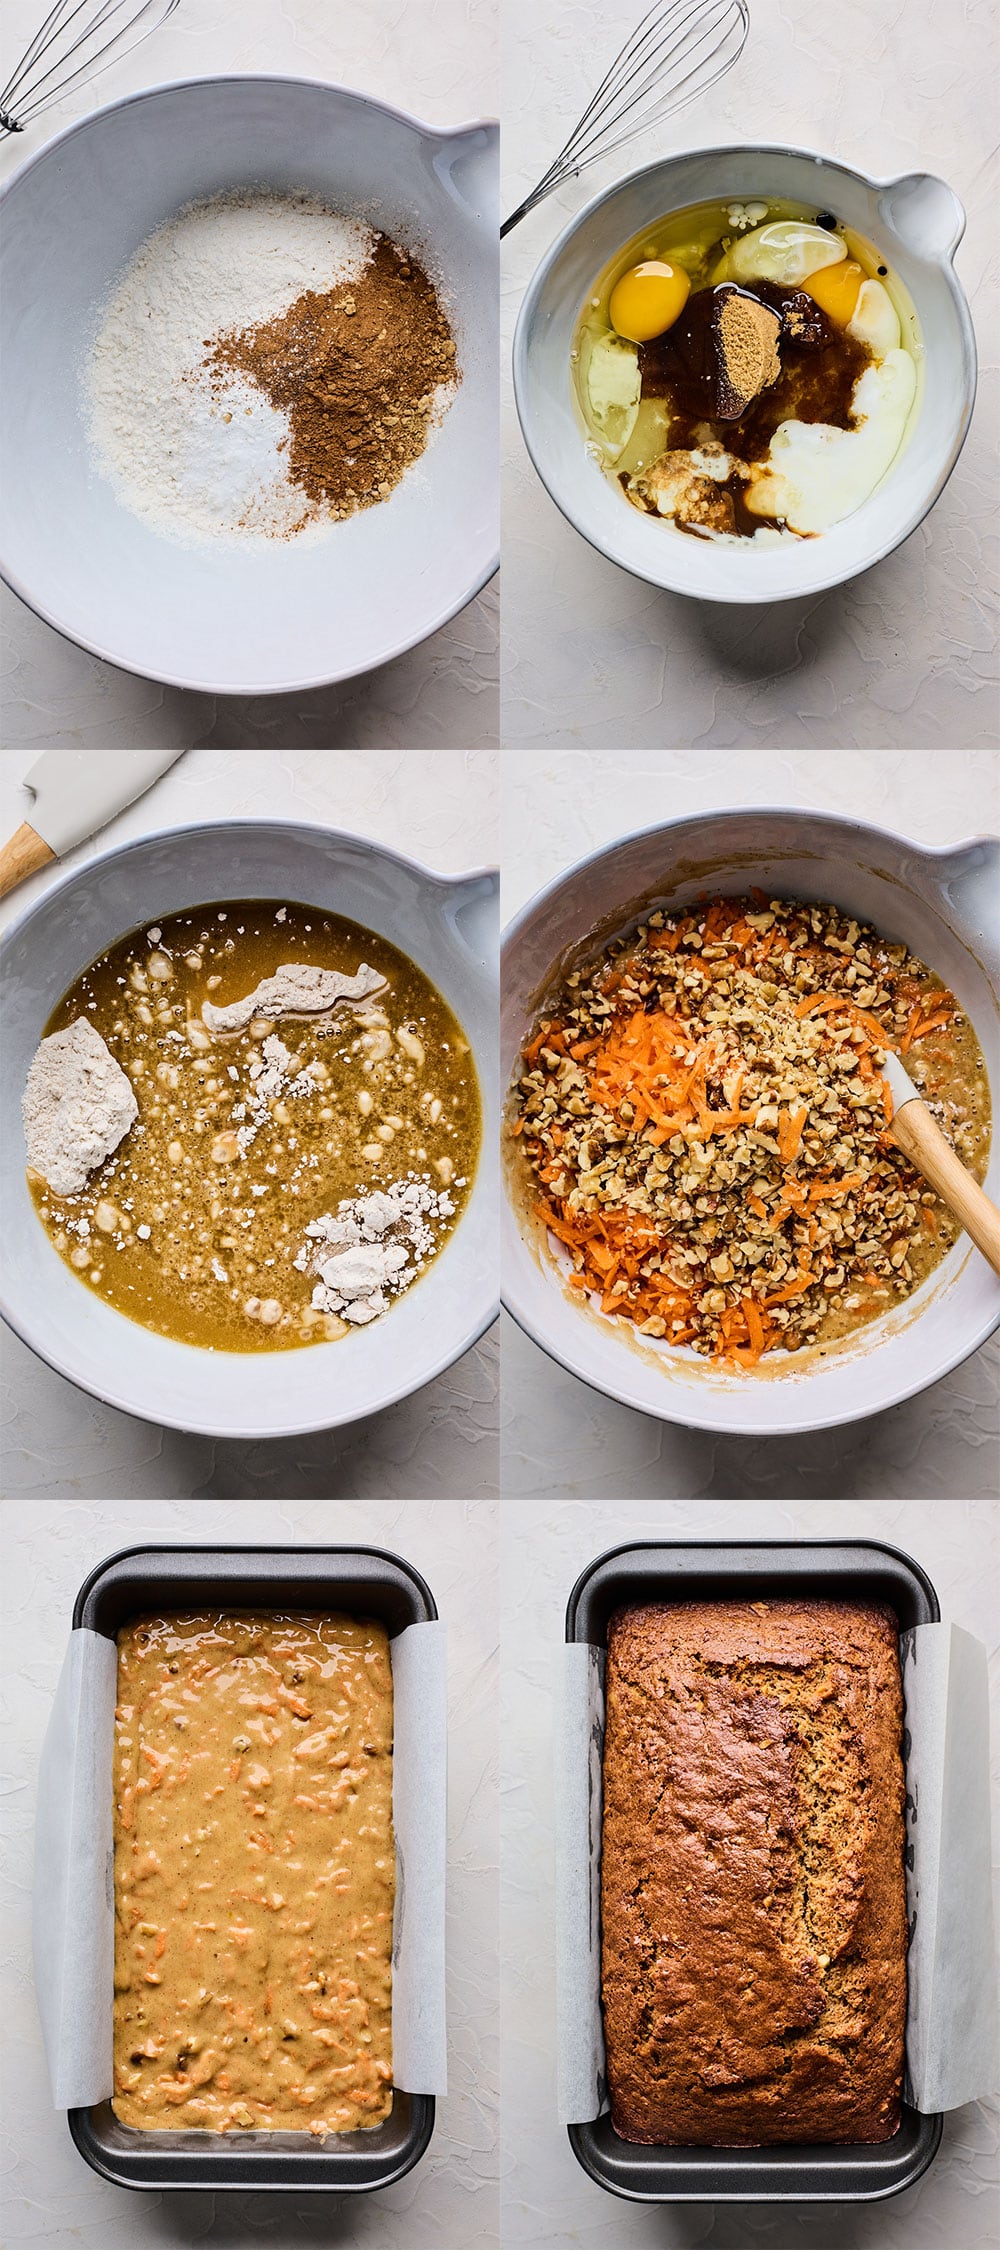 Step by step guide to make Carrot Cake Loaf